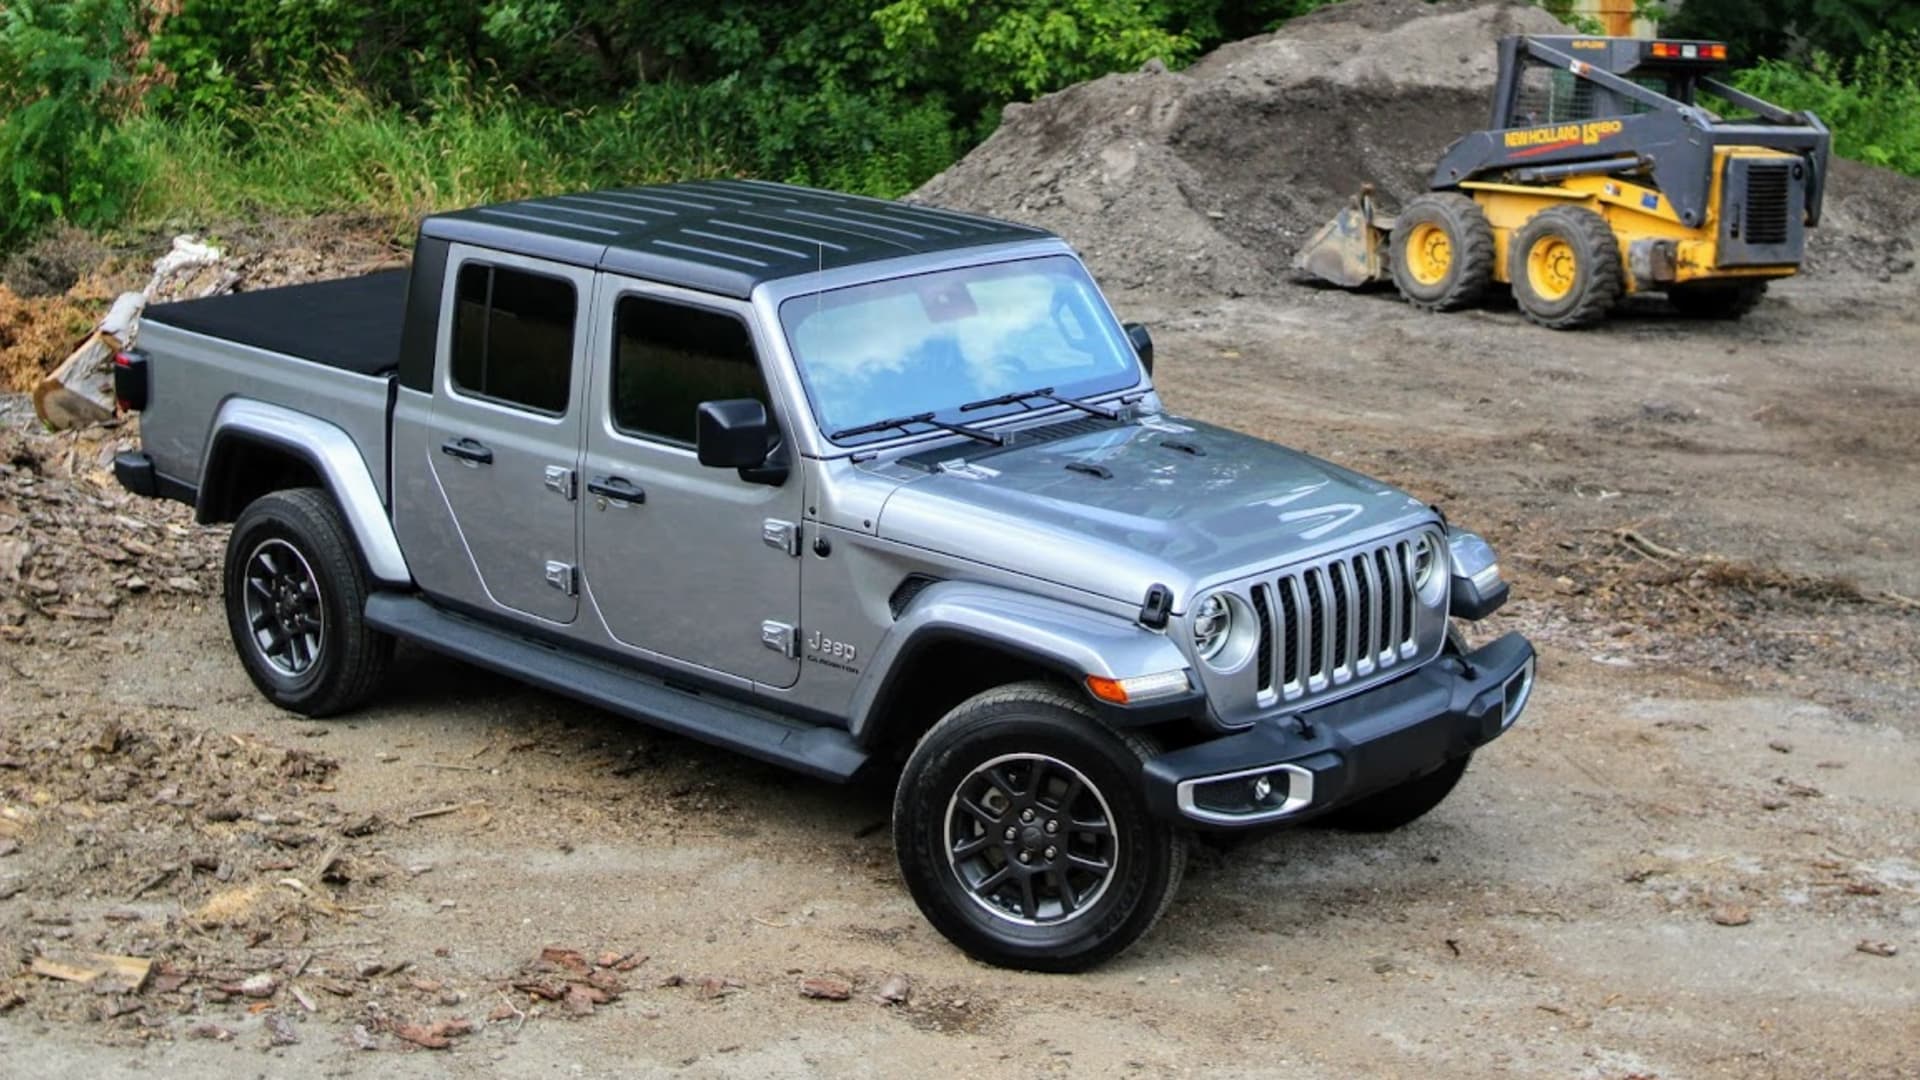 Review: The 2019 Jeep Gladiator pickup is extremely cool, smartly designed  and incredibly capable